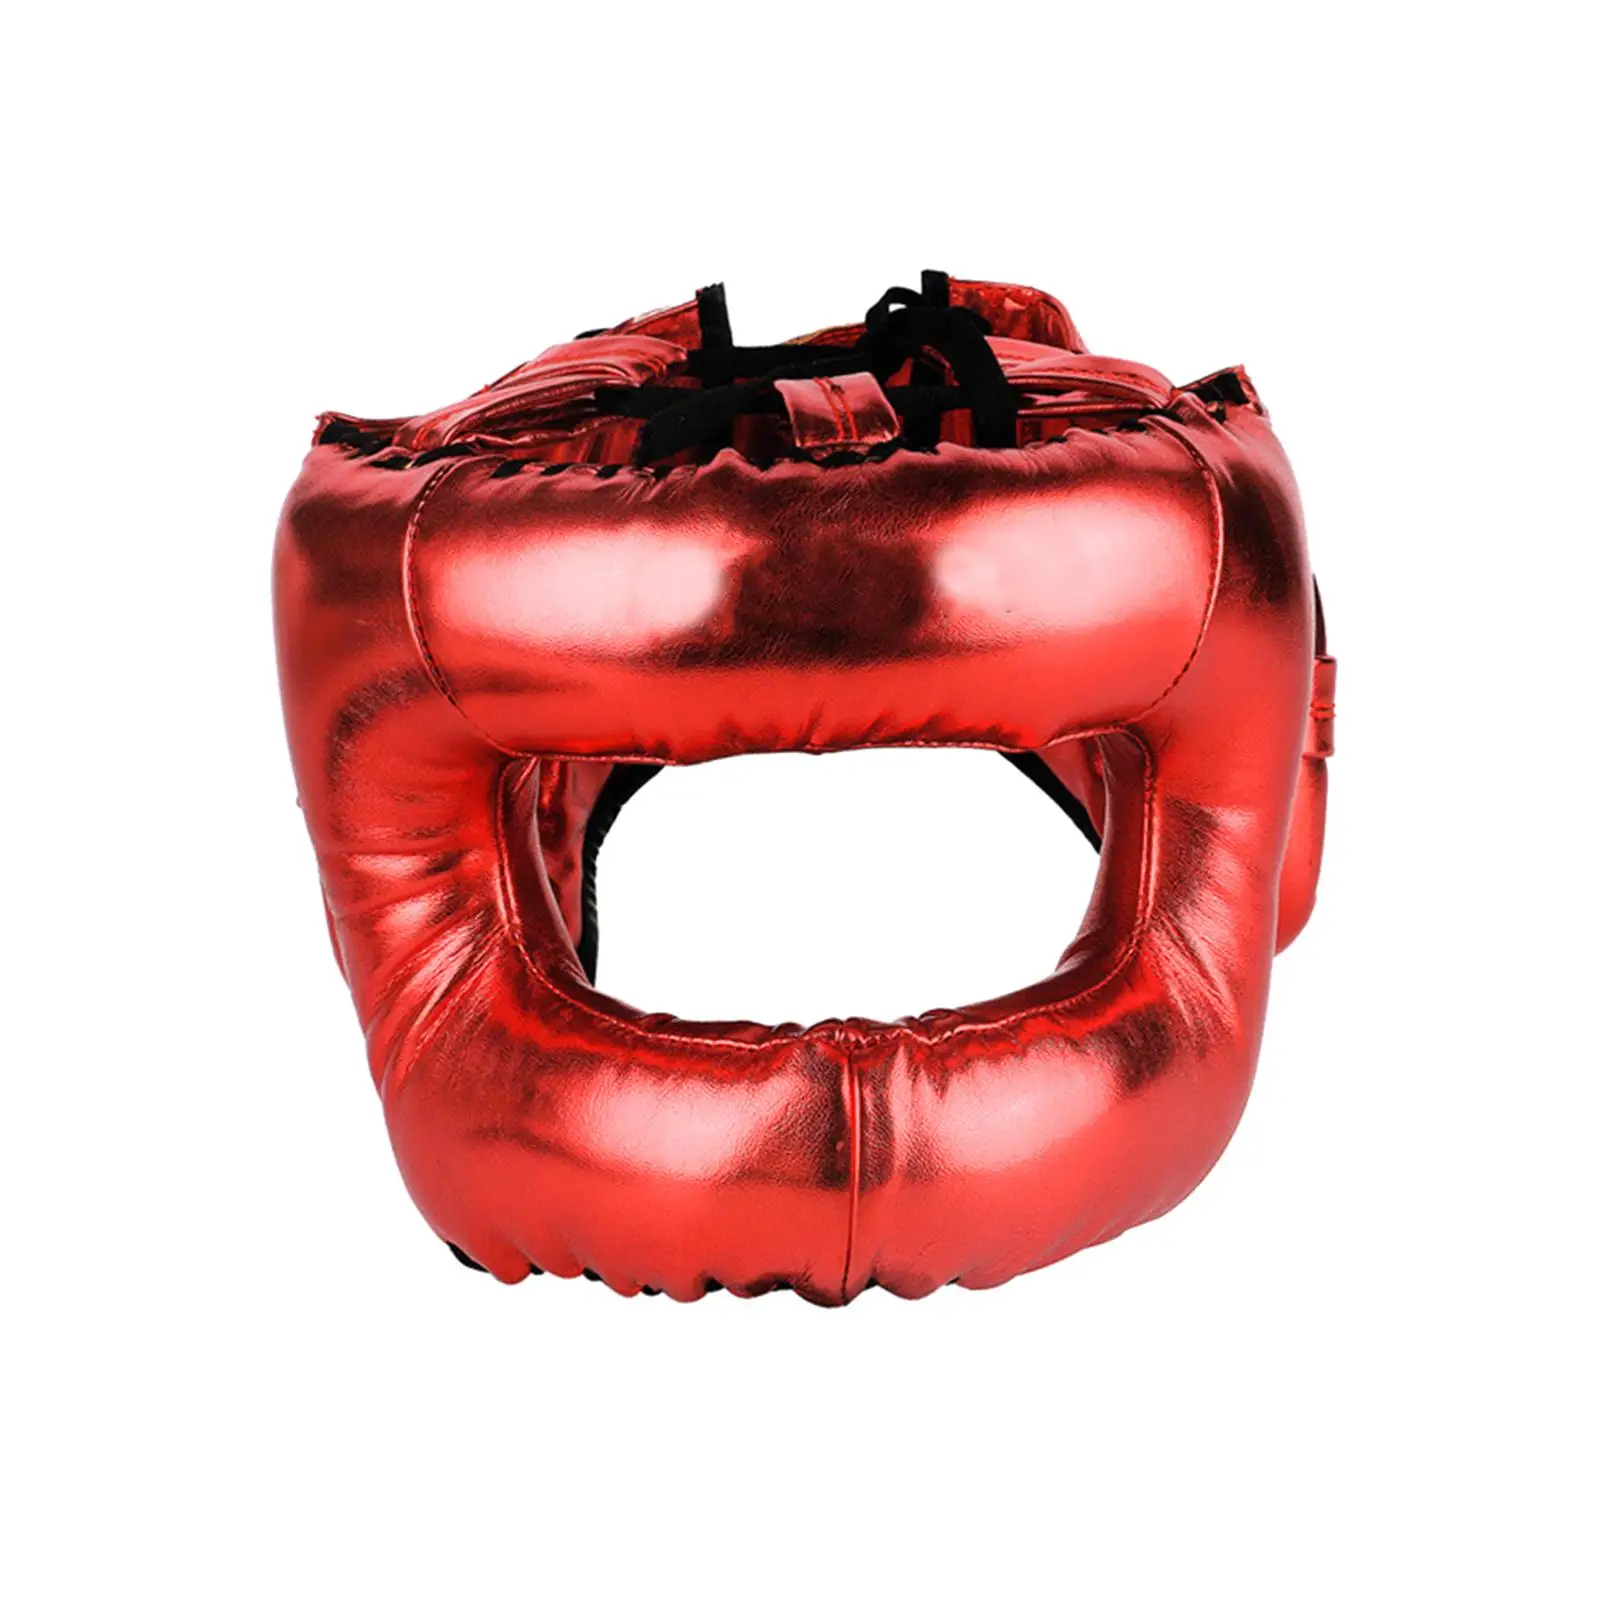 Boxing Headgear Ventilated Adjustable Padded Training Durable Unisex Face Shield for Sanda Sparring Kickboxing Karate Supplies